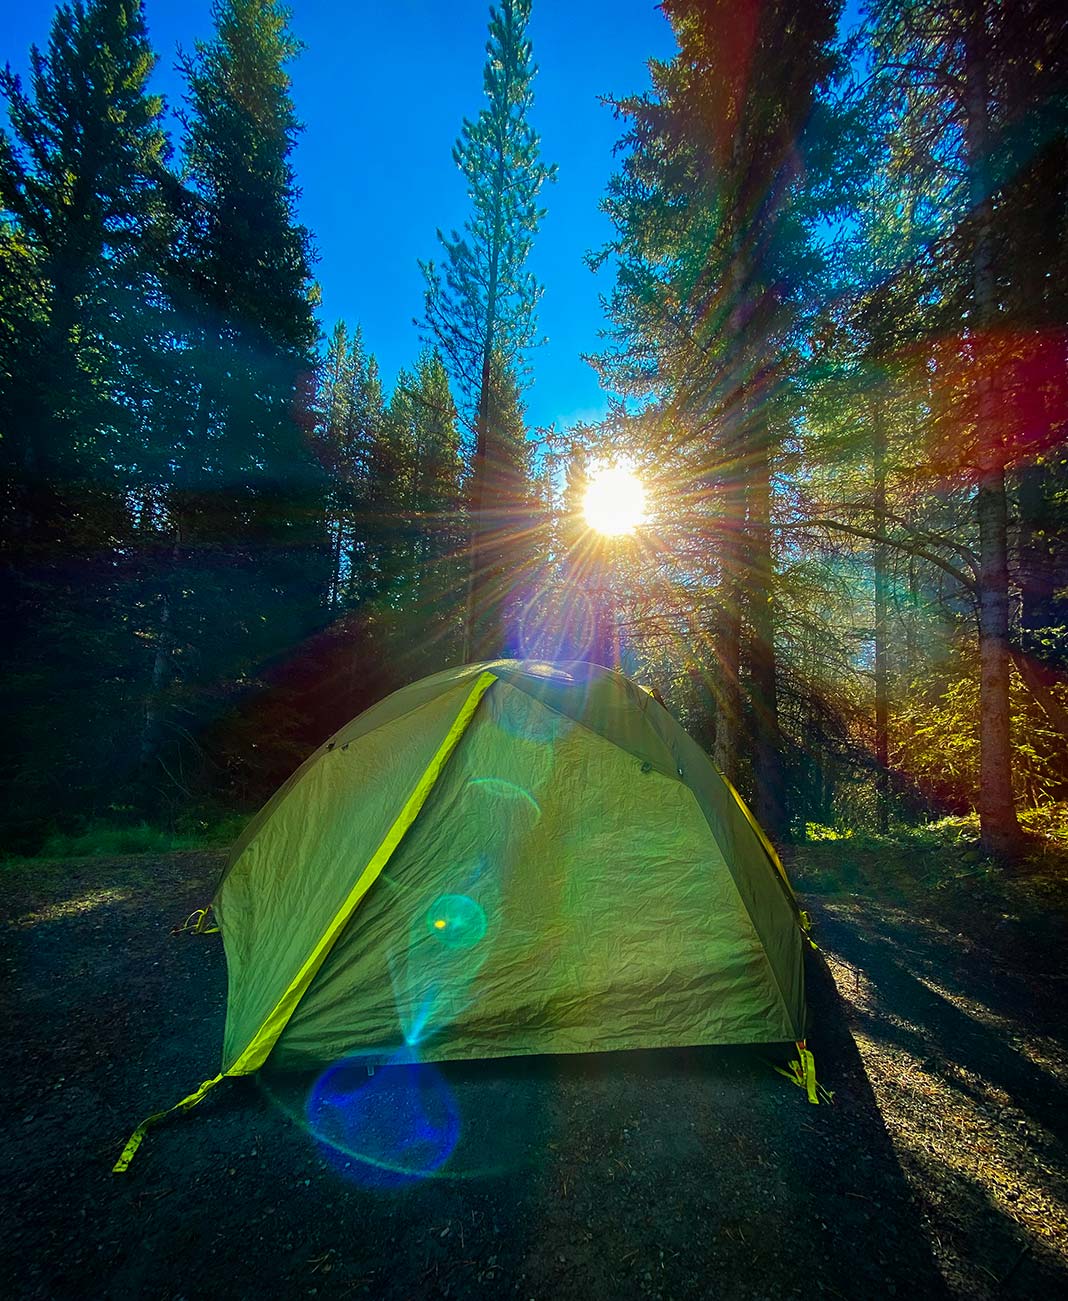 Tent with sunshine shining through the trees